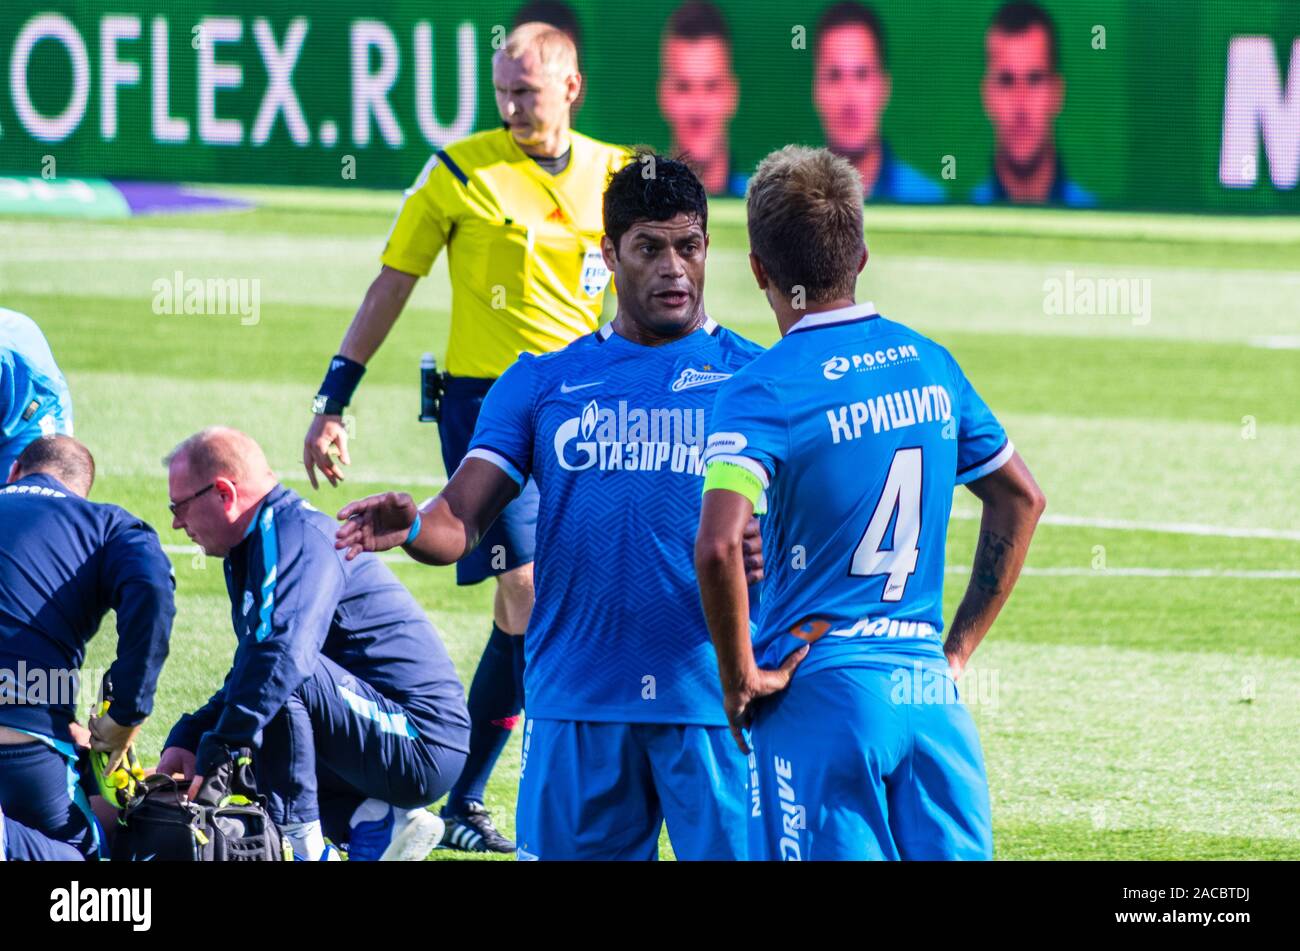 SAINT-PETERSBURG, RUSSIA - AUGUST 1: Players of Football Club Zenit Hulk and Domeniko Criscito at the match of Championship of Russia on August 1, 201 Stock Photo